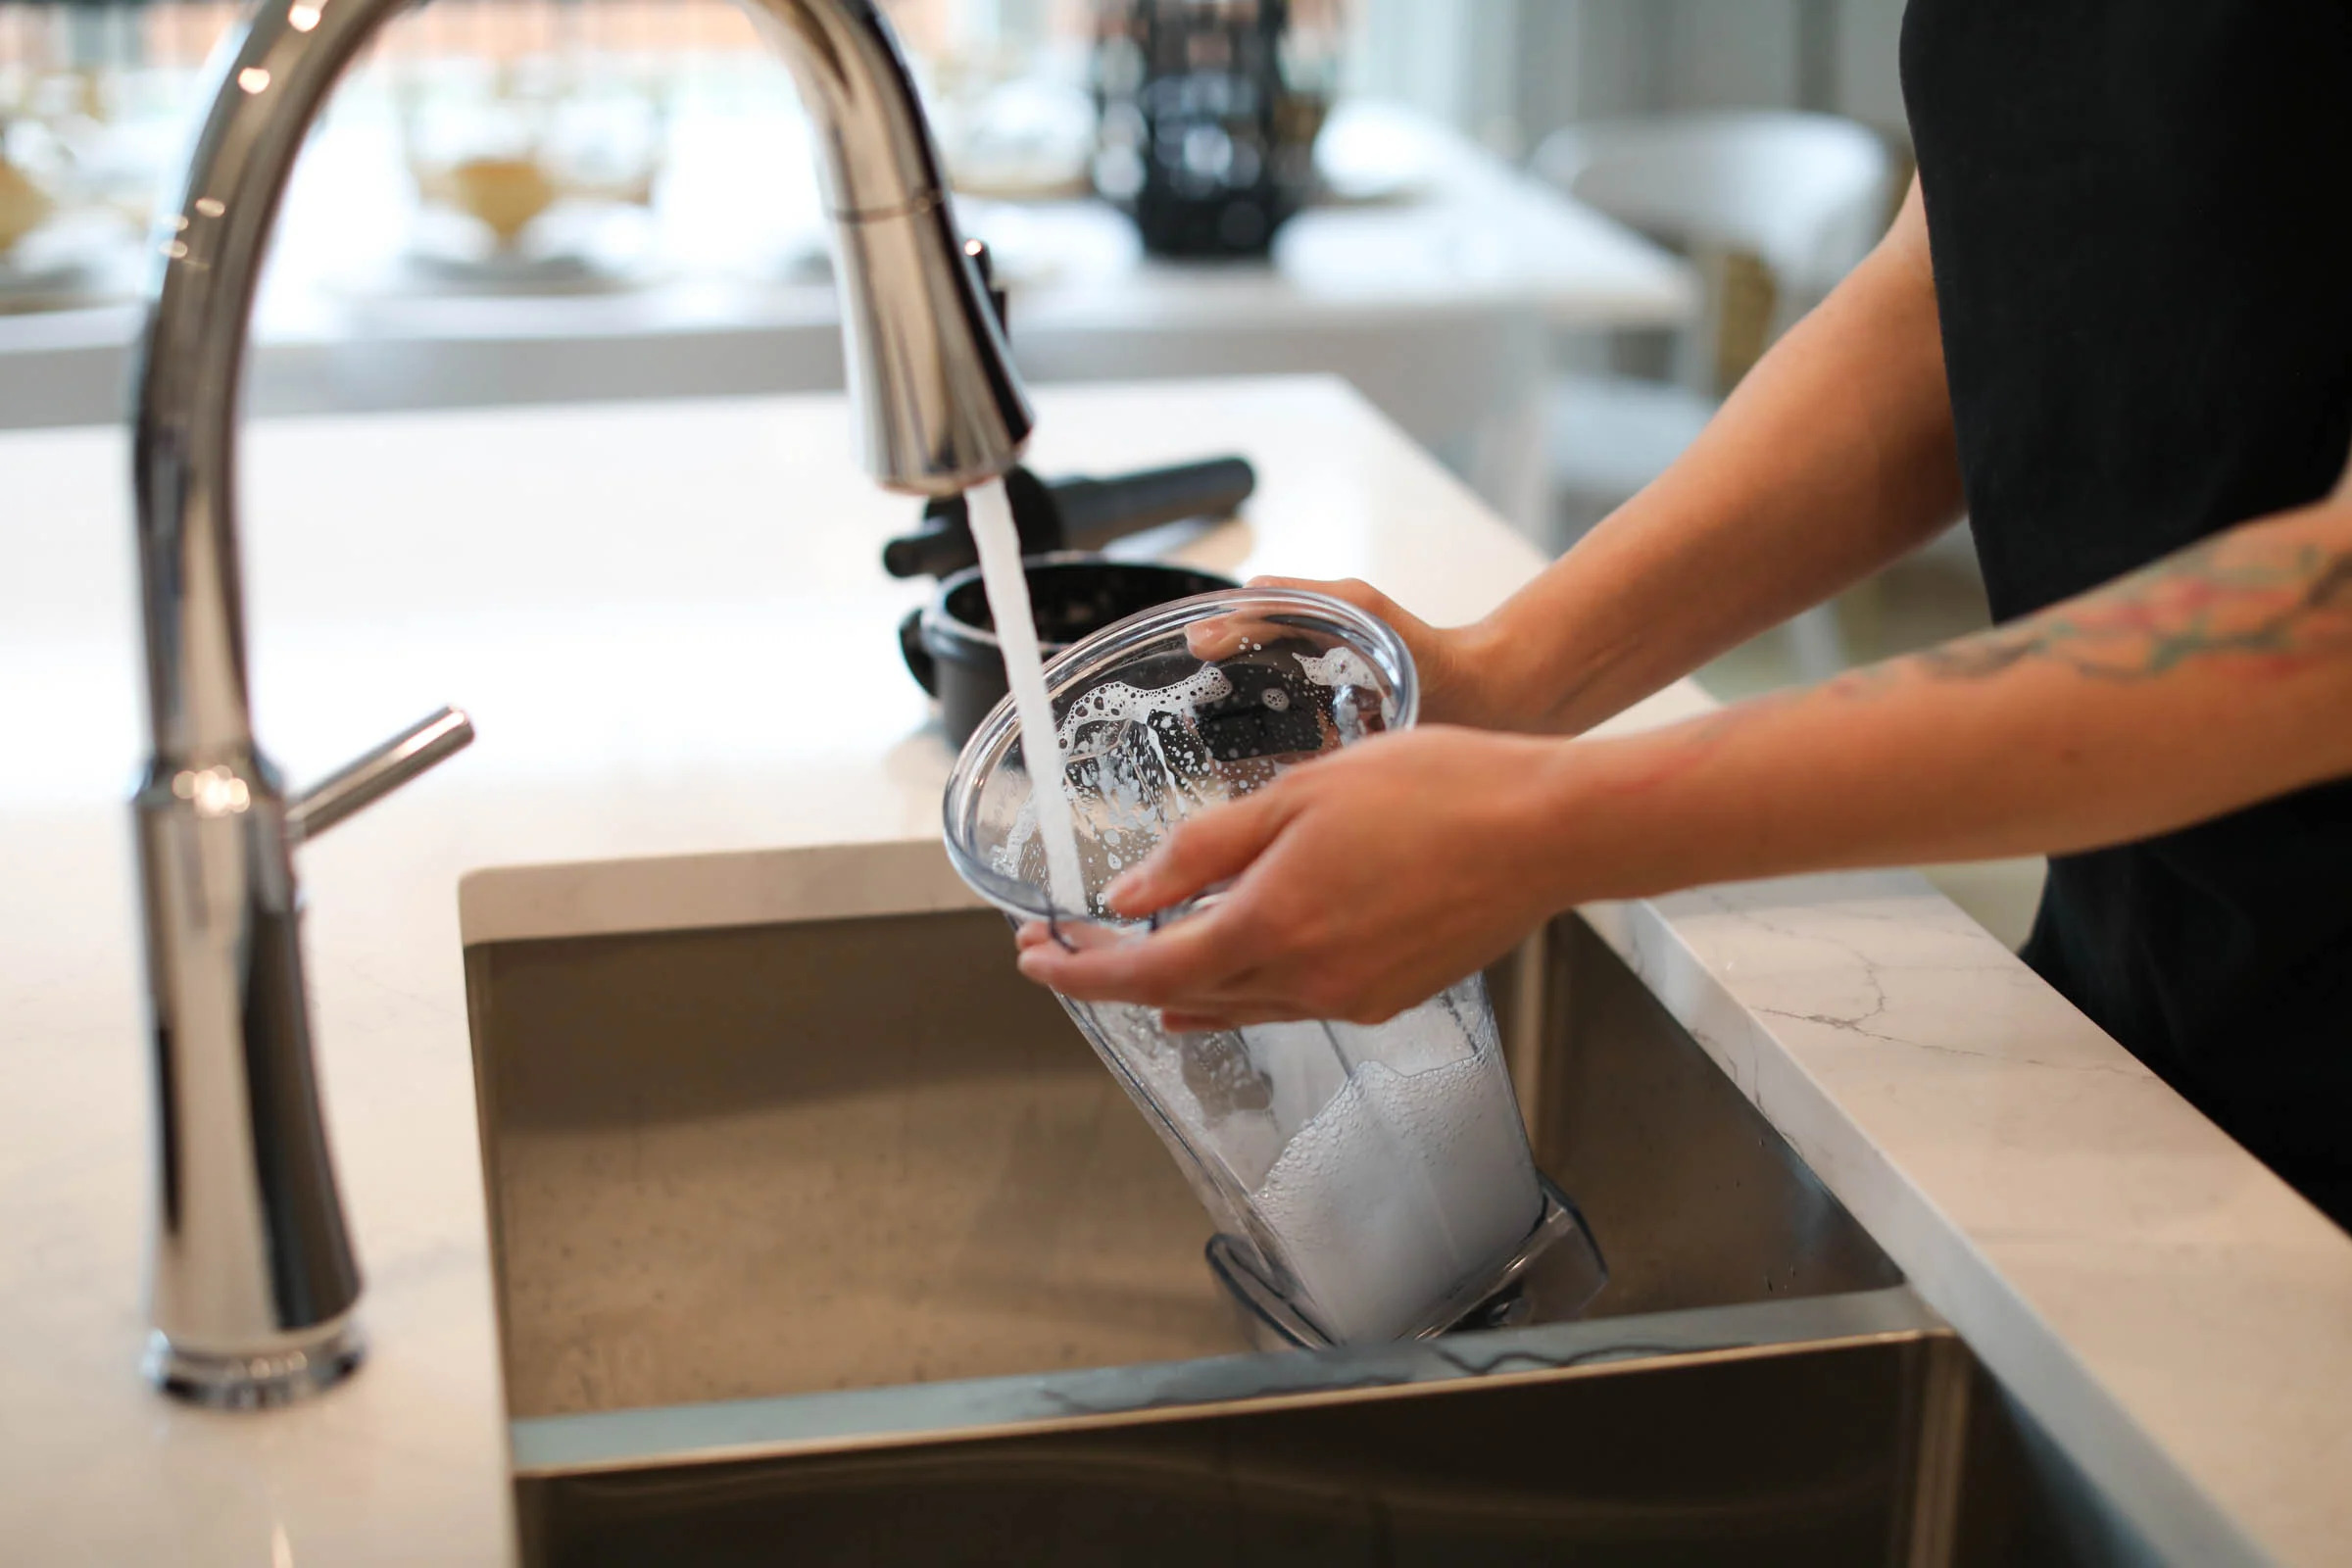 The Best Method for Cleaning Blenders